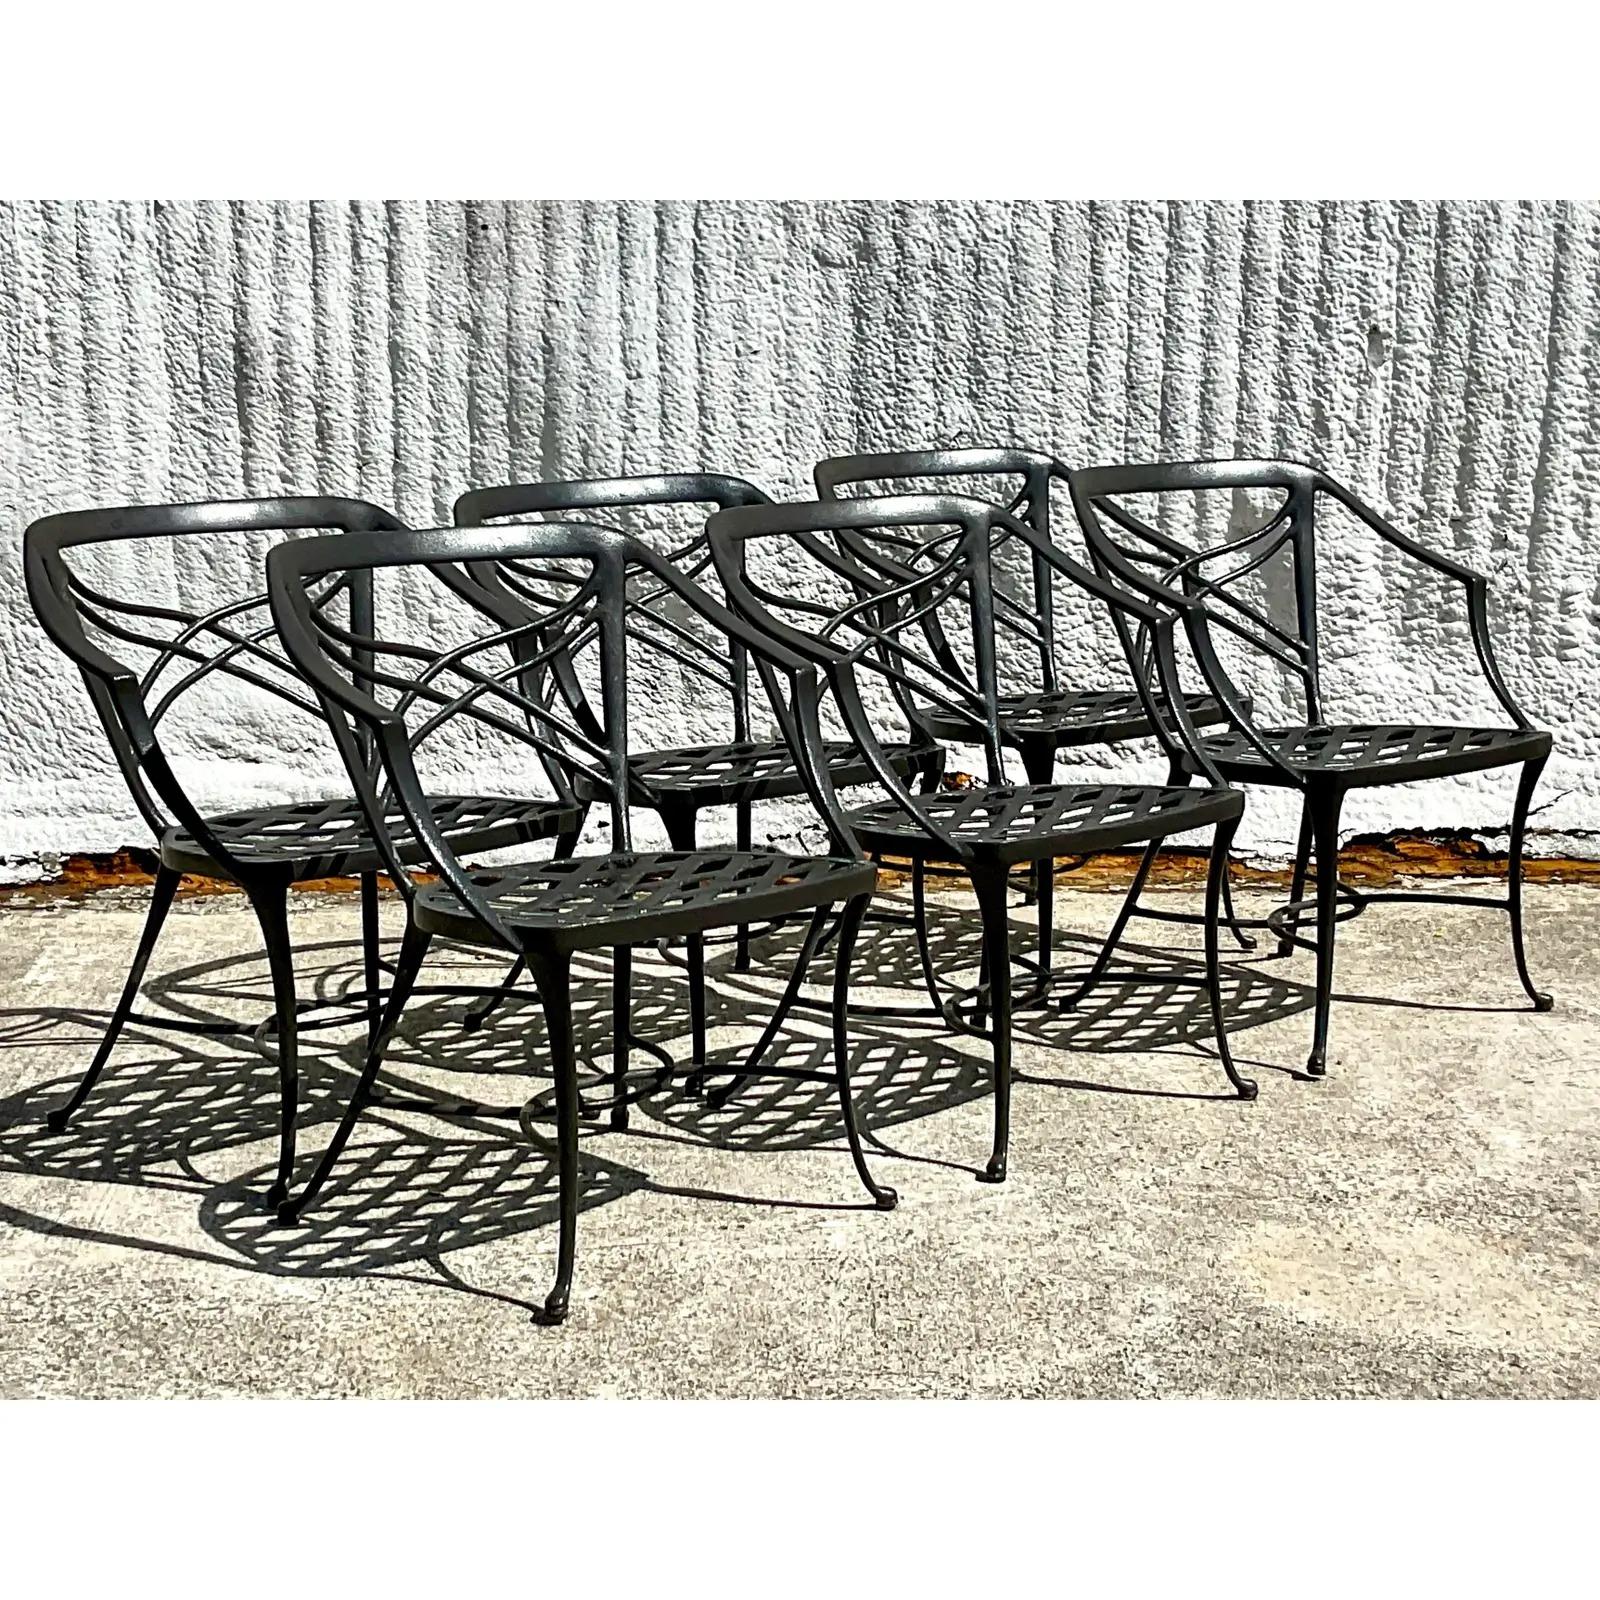 A fabulous vintage Coastal outdoor dining set. A fabulous large table and six coordinating chairs. Made by the iconic Brown Jordan. Part of their Classic ll series. Marked with their barcode on the bottom. Acquired from a Palm Beach estate.

Chair